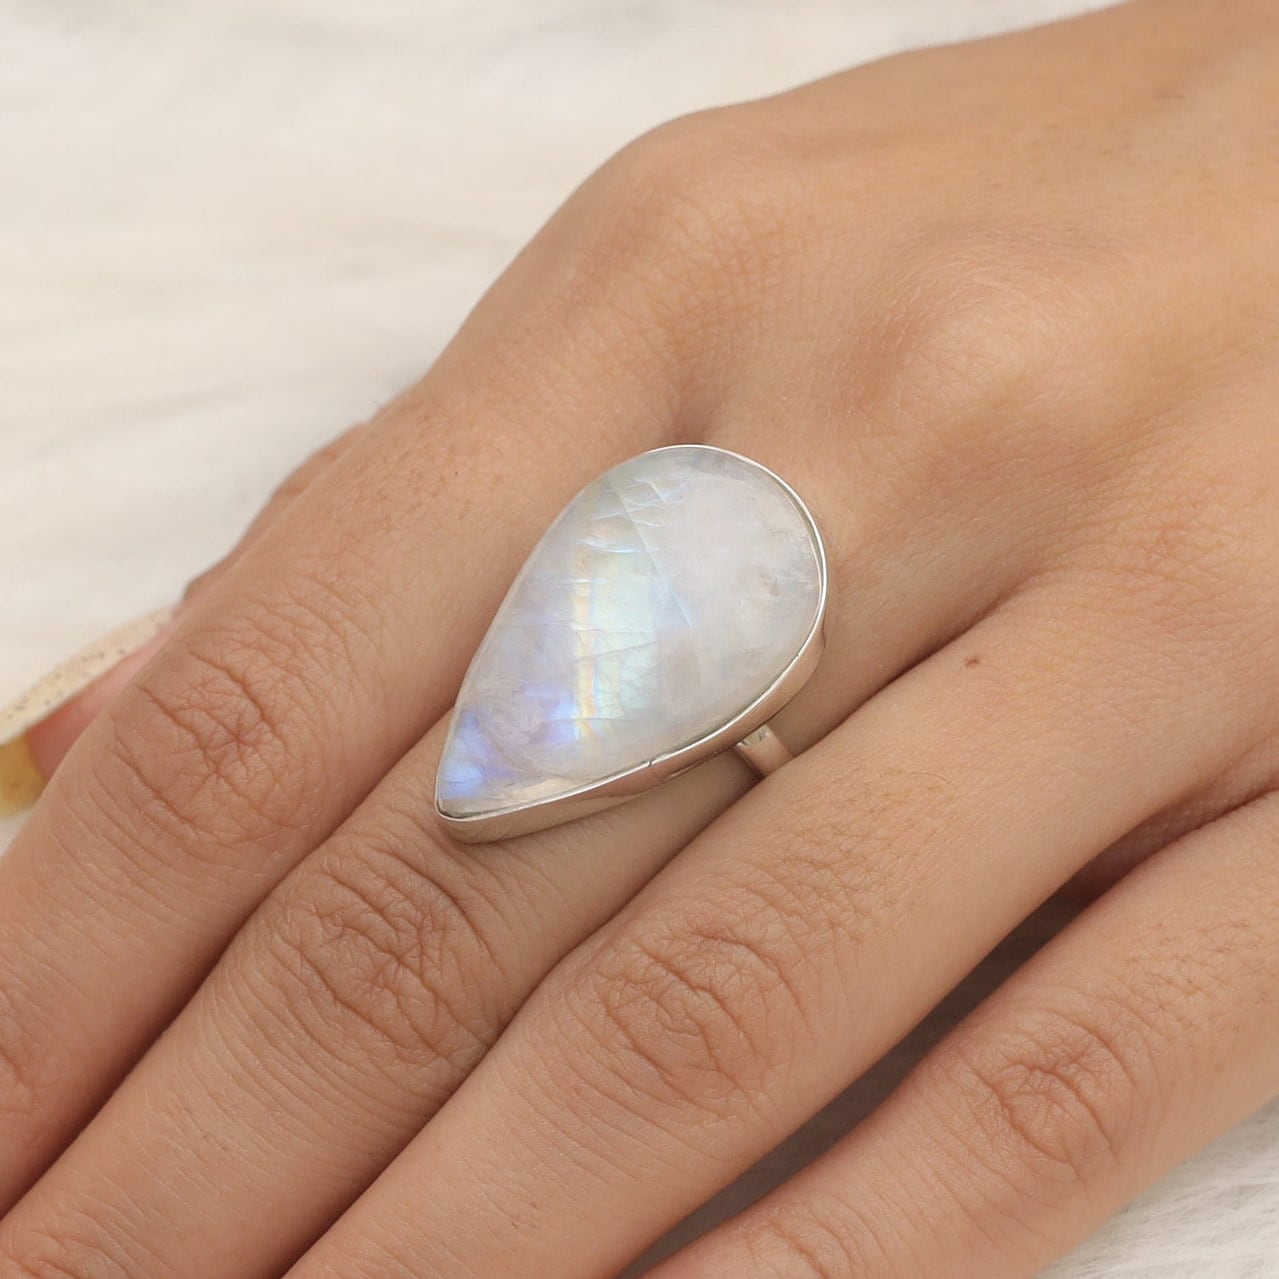 Rainbow Moonstone Ring, 925 Sterling Silver Ring, June Birthstone Ring, Handmade Silver Ring, Bohemian Jewelry, Elegant Ring, Gift For Her